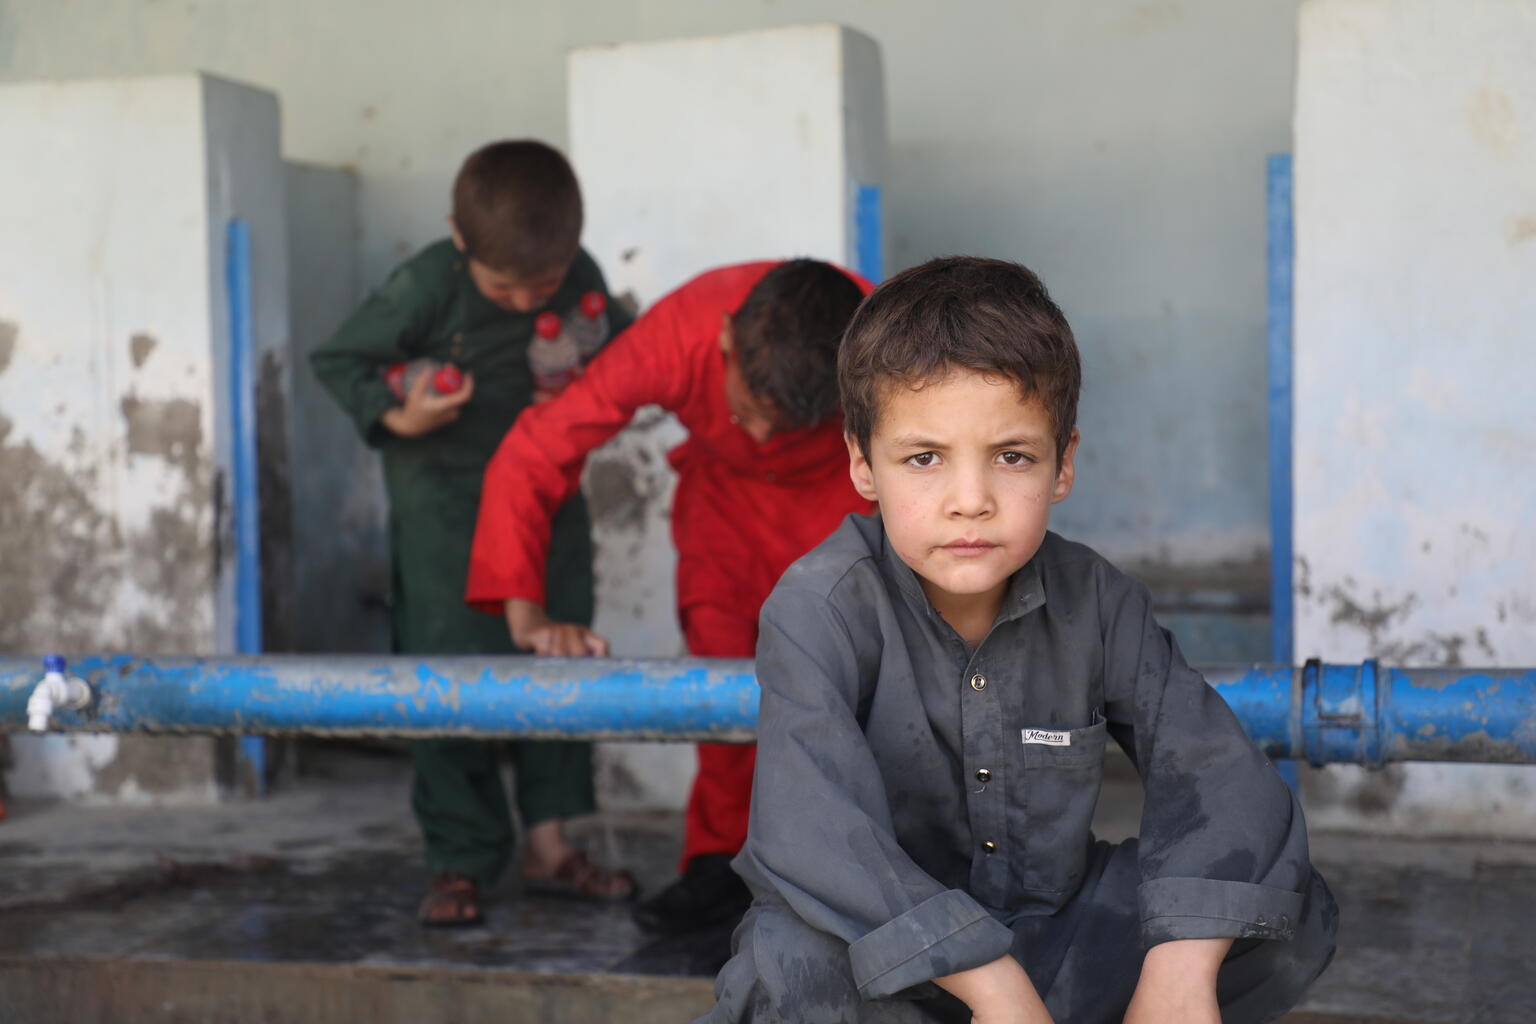 A child is pictured in Afghanistan after he and his family fled their homes amidst escalating conflict.